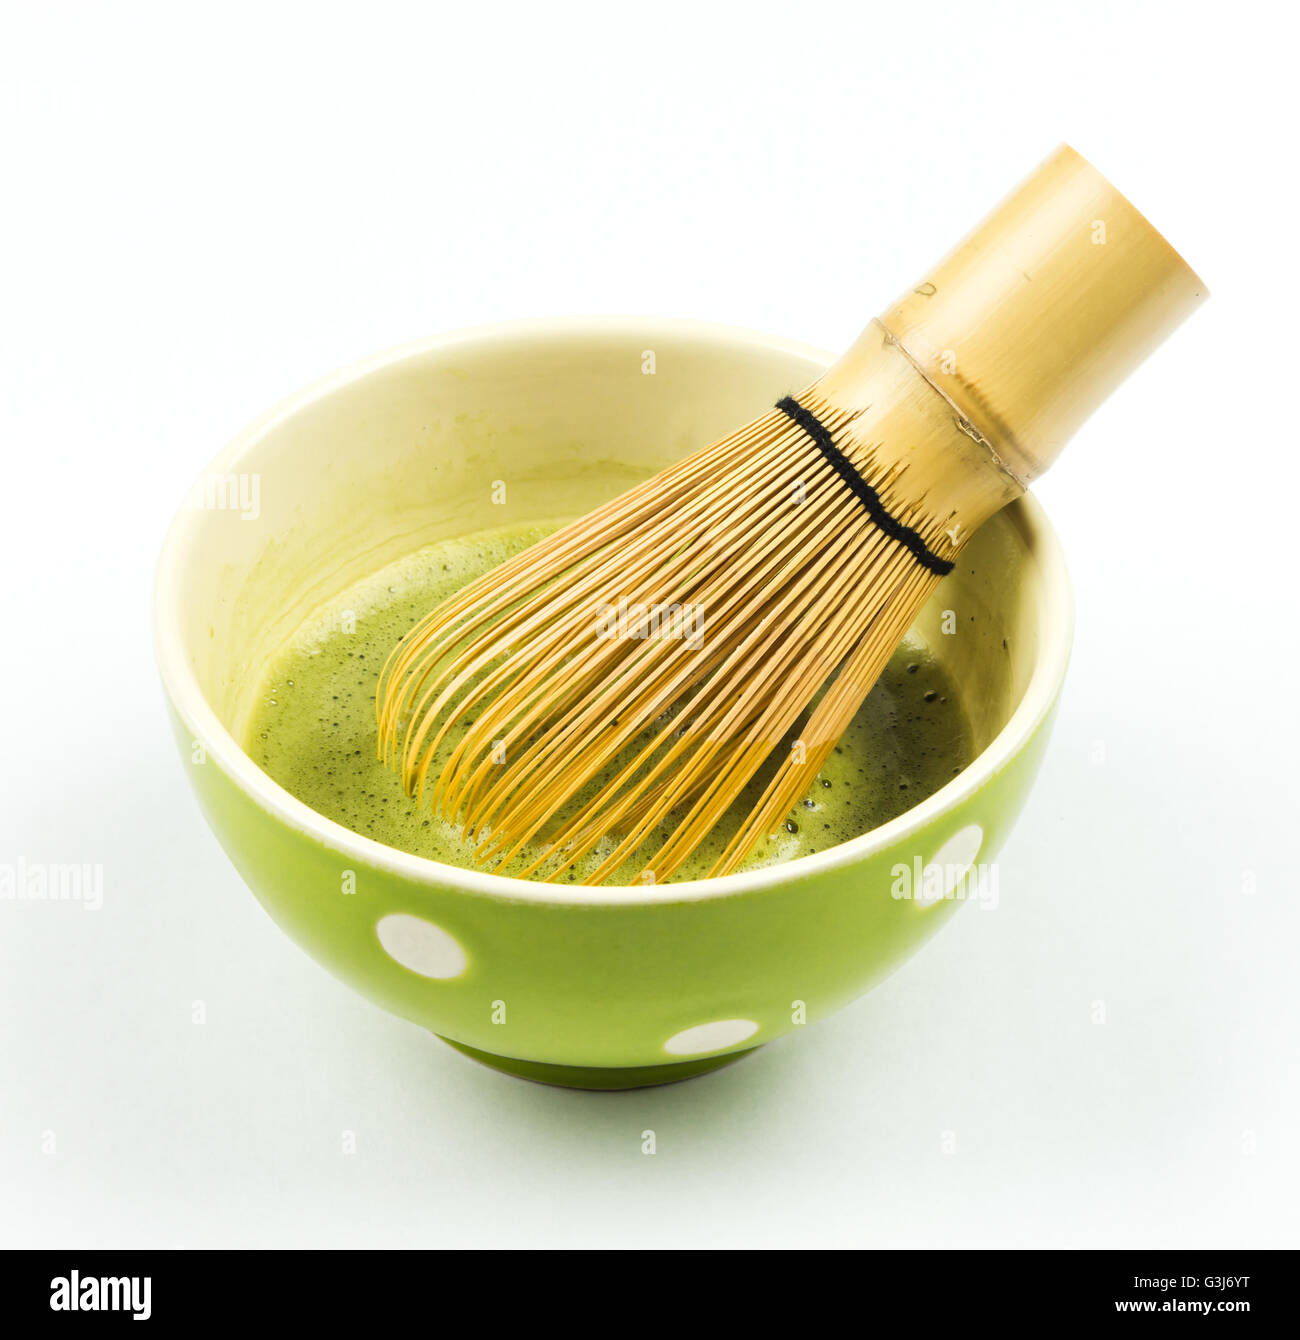 Japanese green tea, green matcha, preparation traditional Japanese green tea. Tea is ready for drinking. Photo is cut out from the original background. Stock Photo